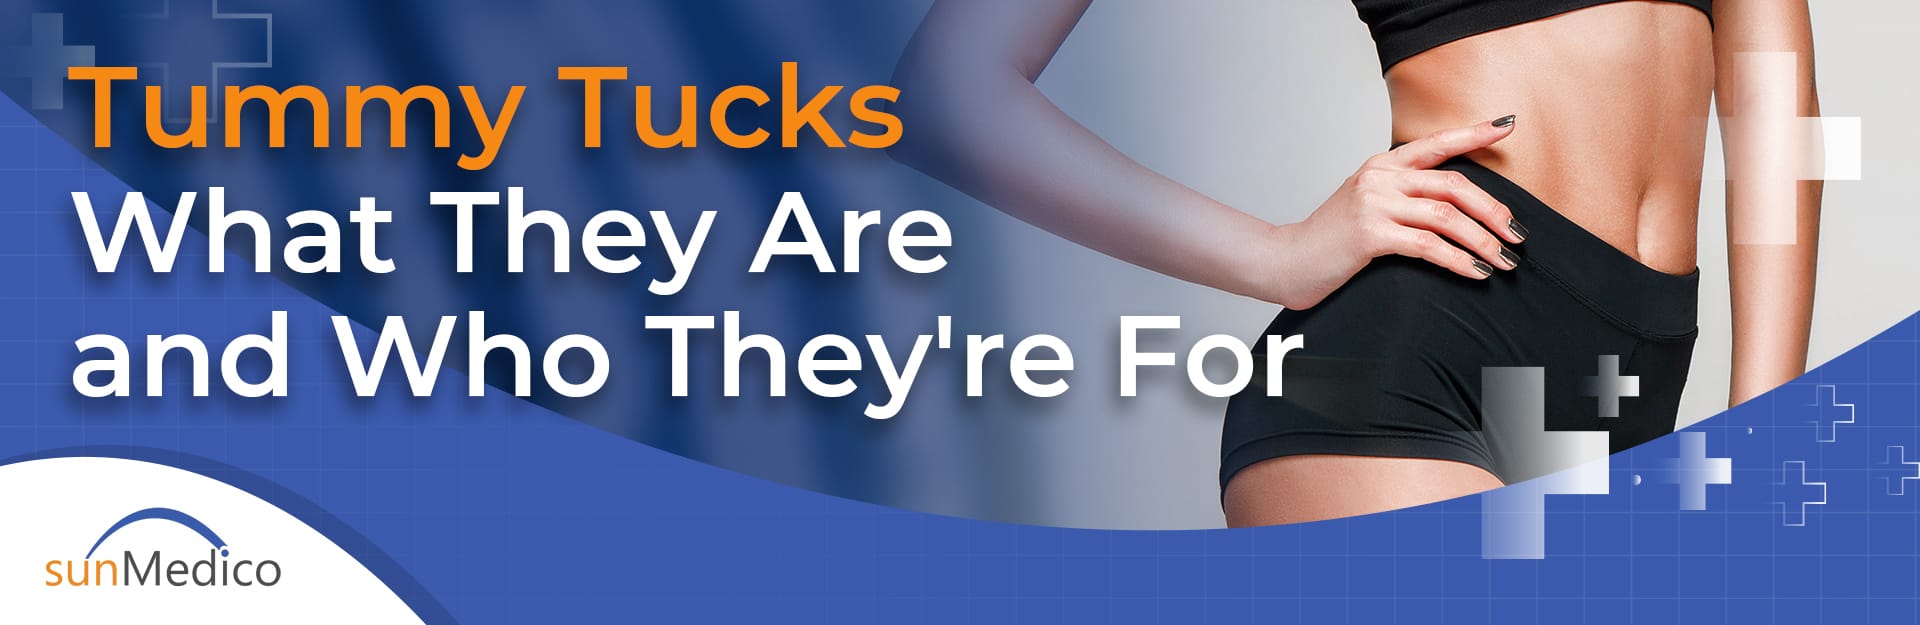 Tummy Tucks: What They Are and Who They’re For